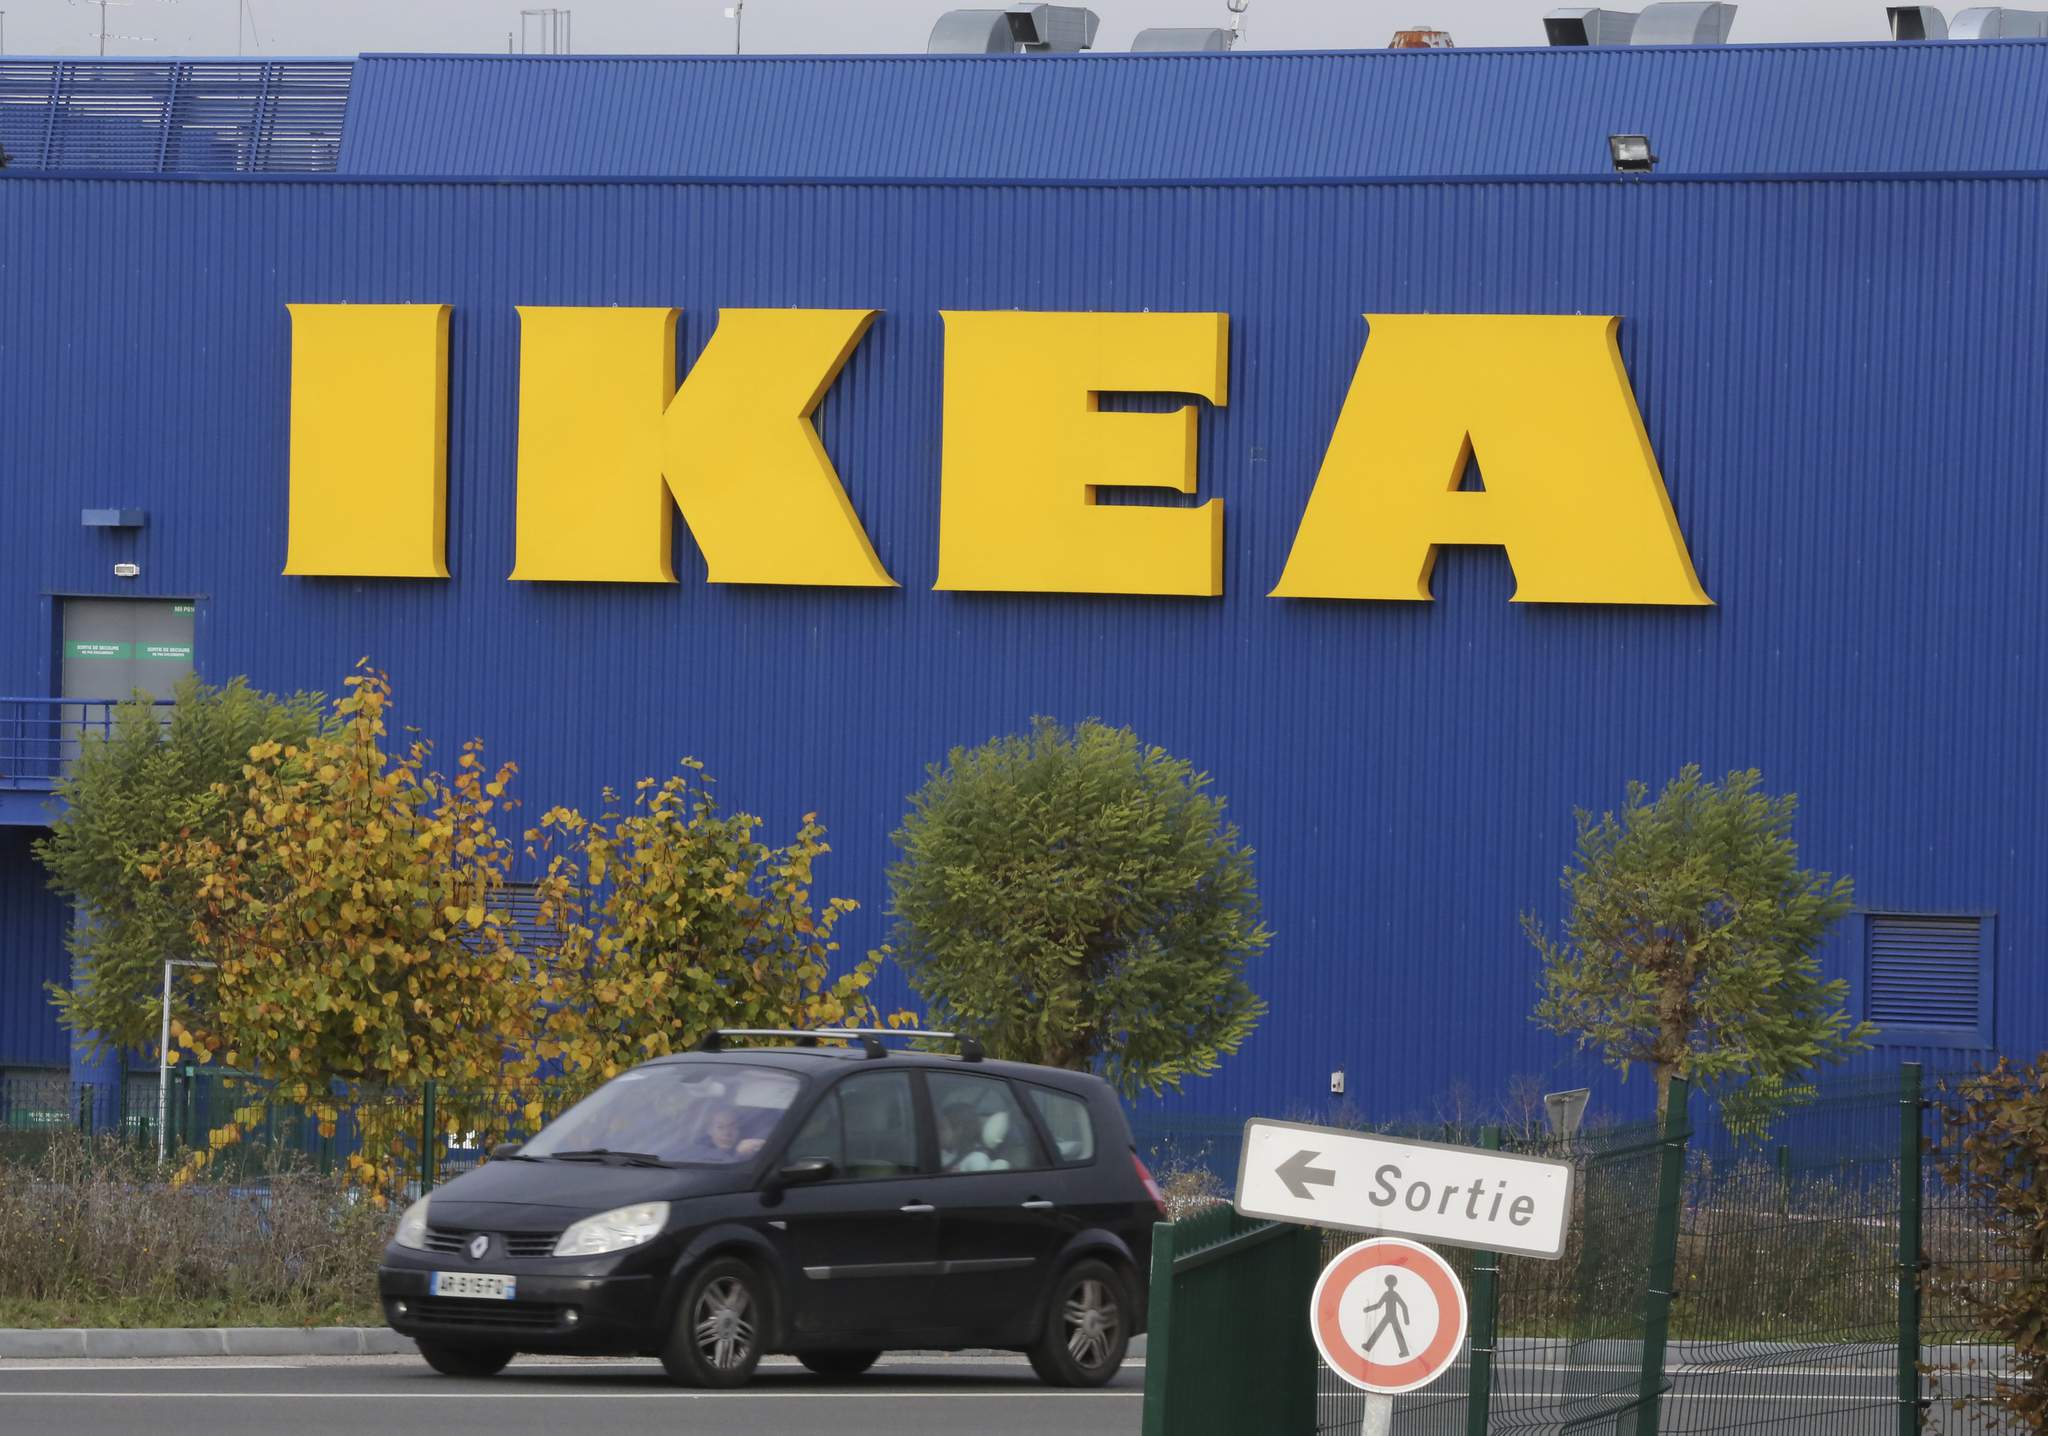 Ikea France on trial over claims it spied on staff, clients